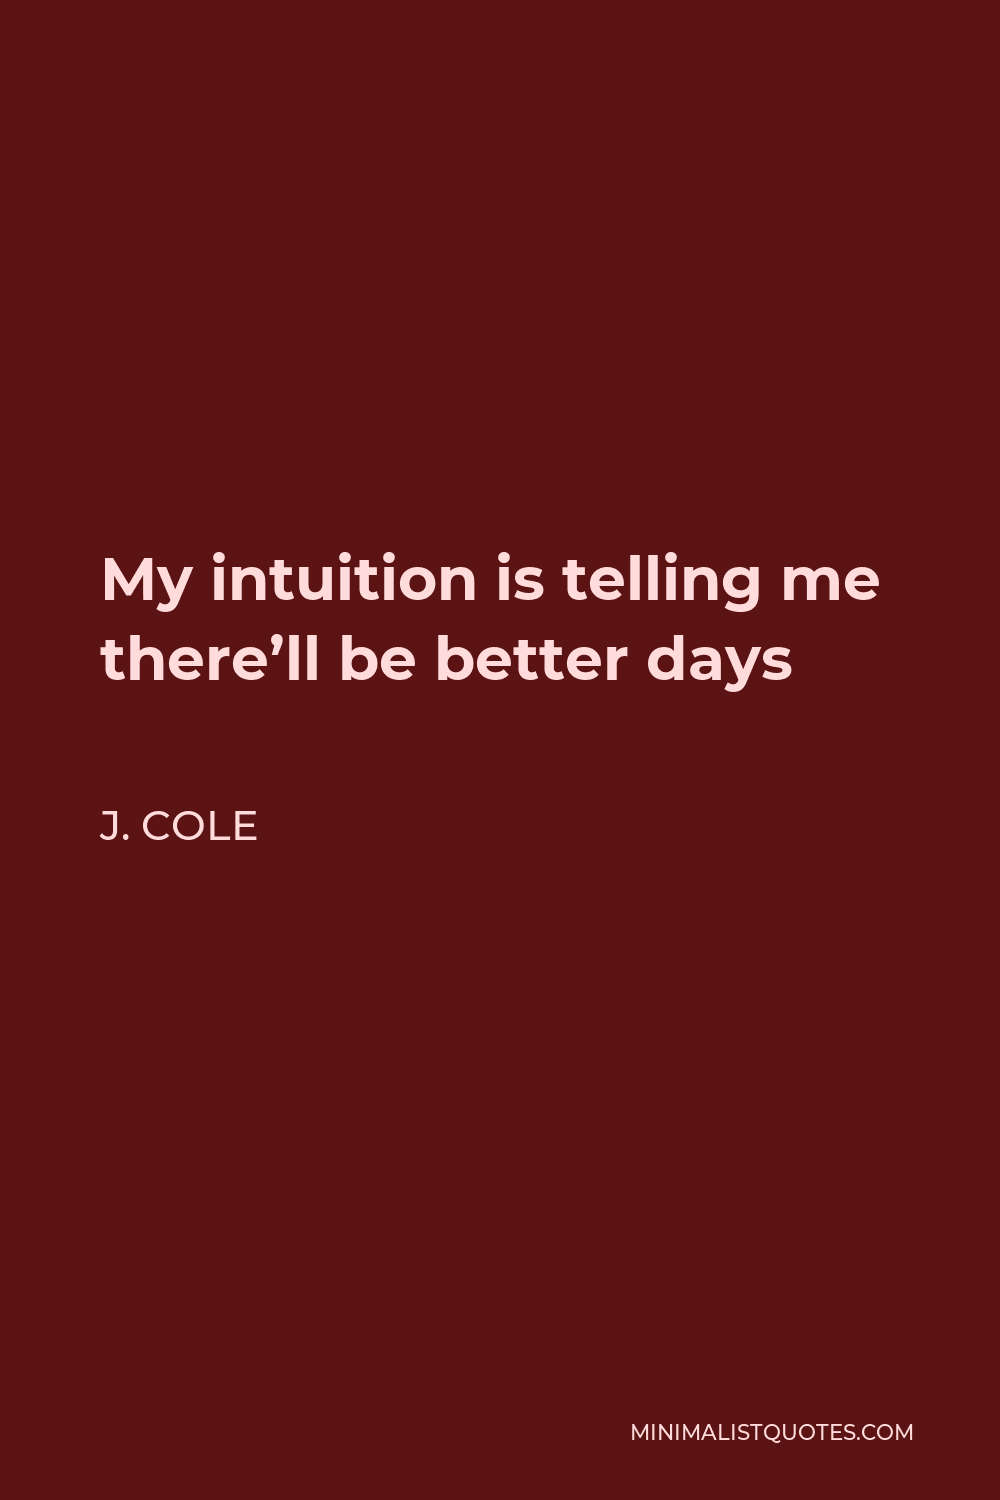 J. Cole Quote - My intuition is telling me there’ll be better days